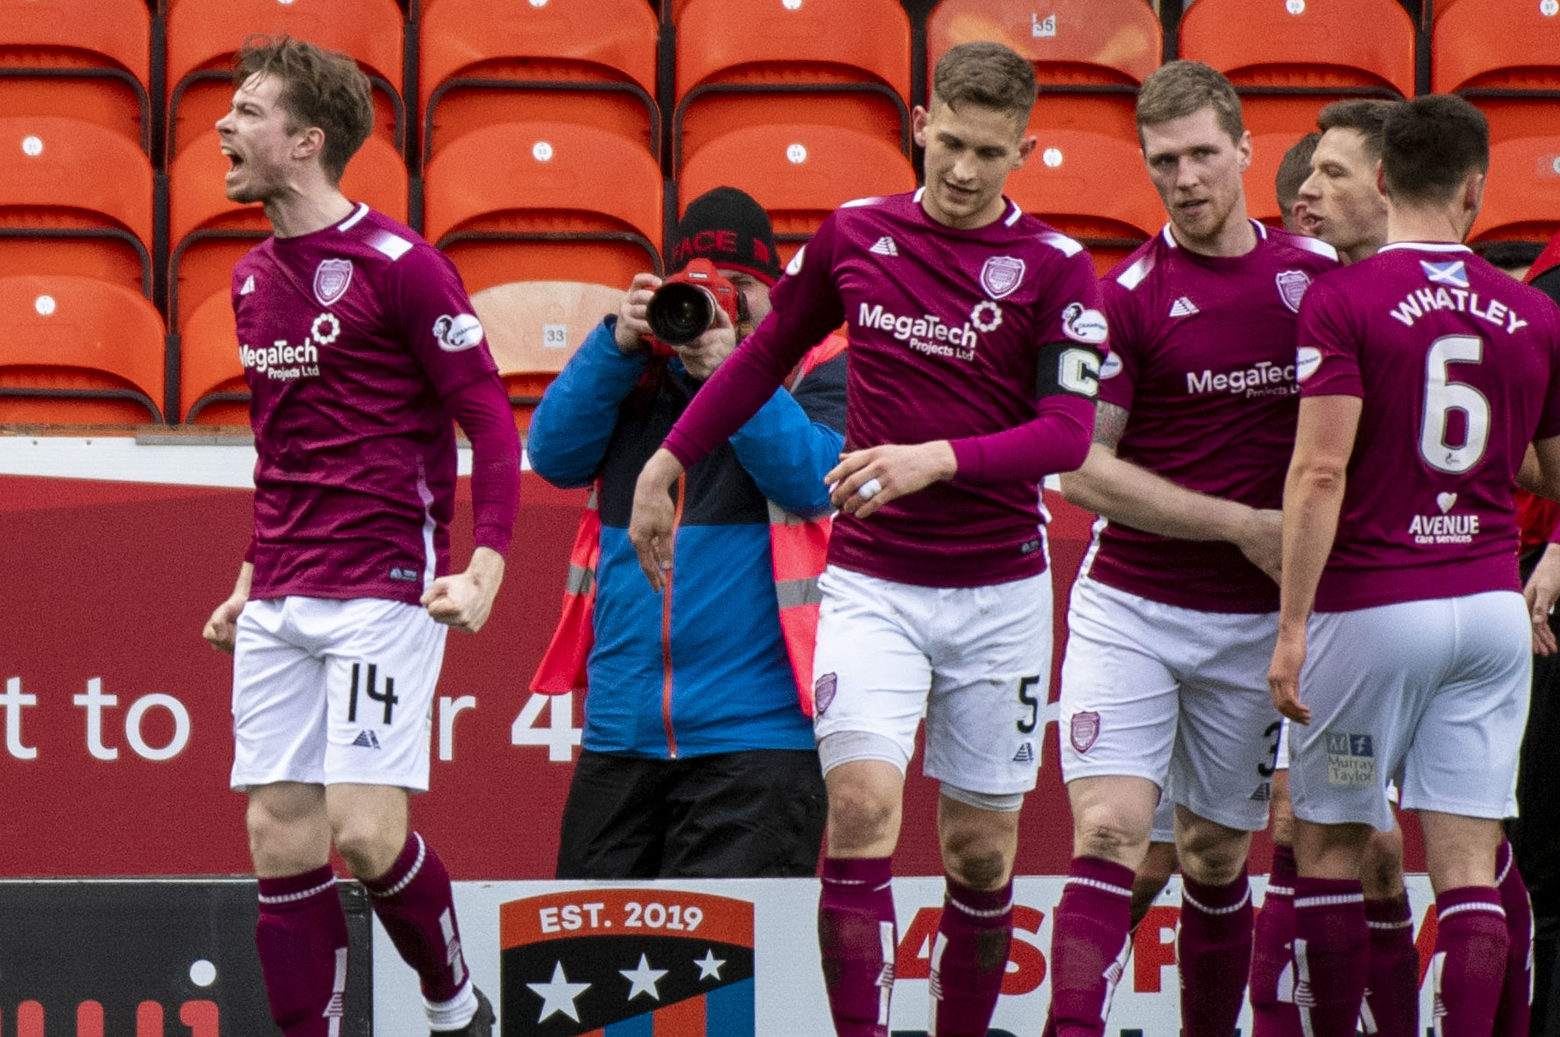 Craig Wighton, left, celebrates after scoring only goal of the game.